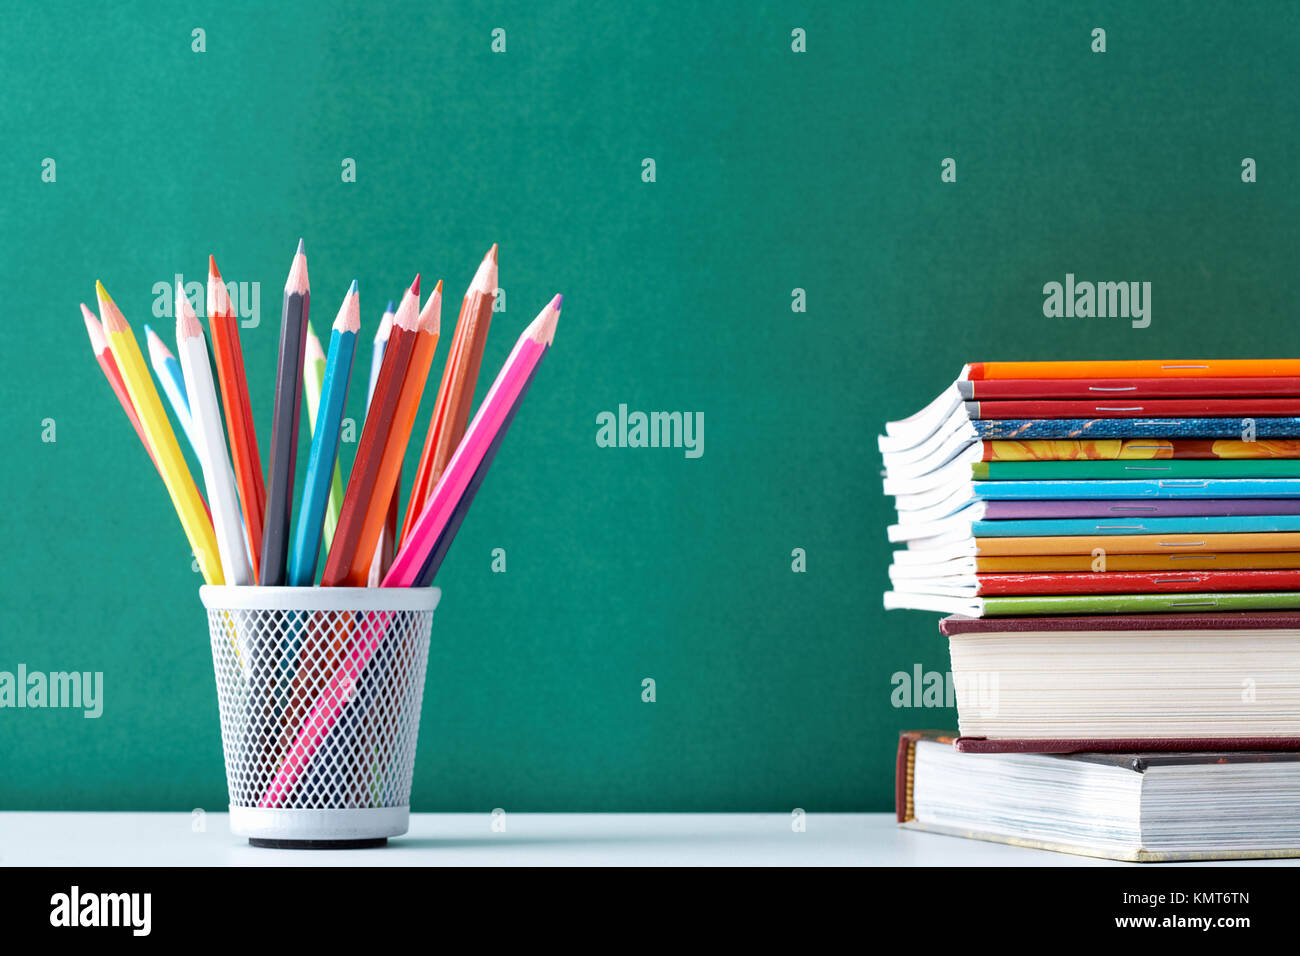 Image of crayons and exercise books against blackboard Stock Photo